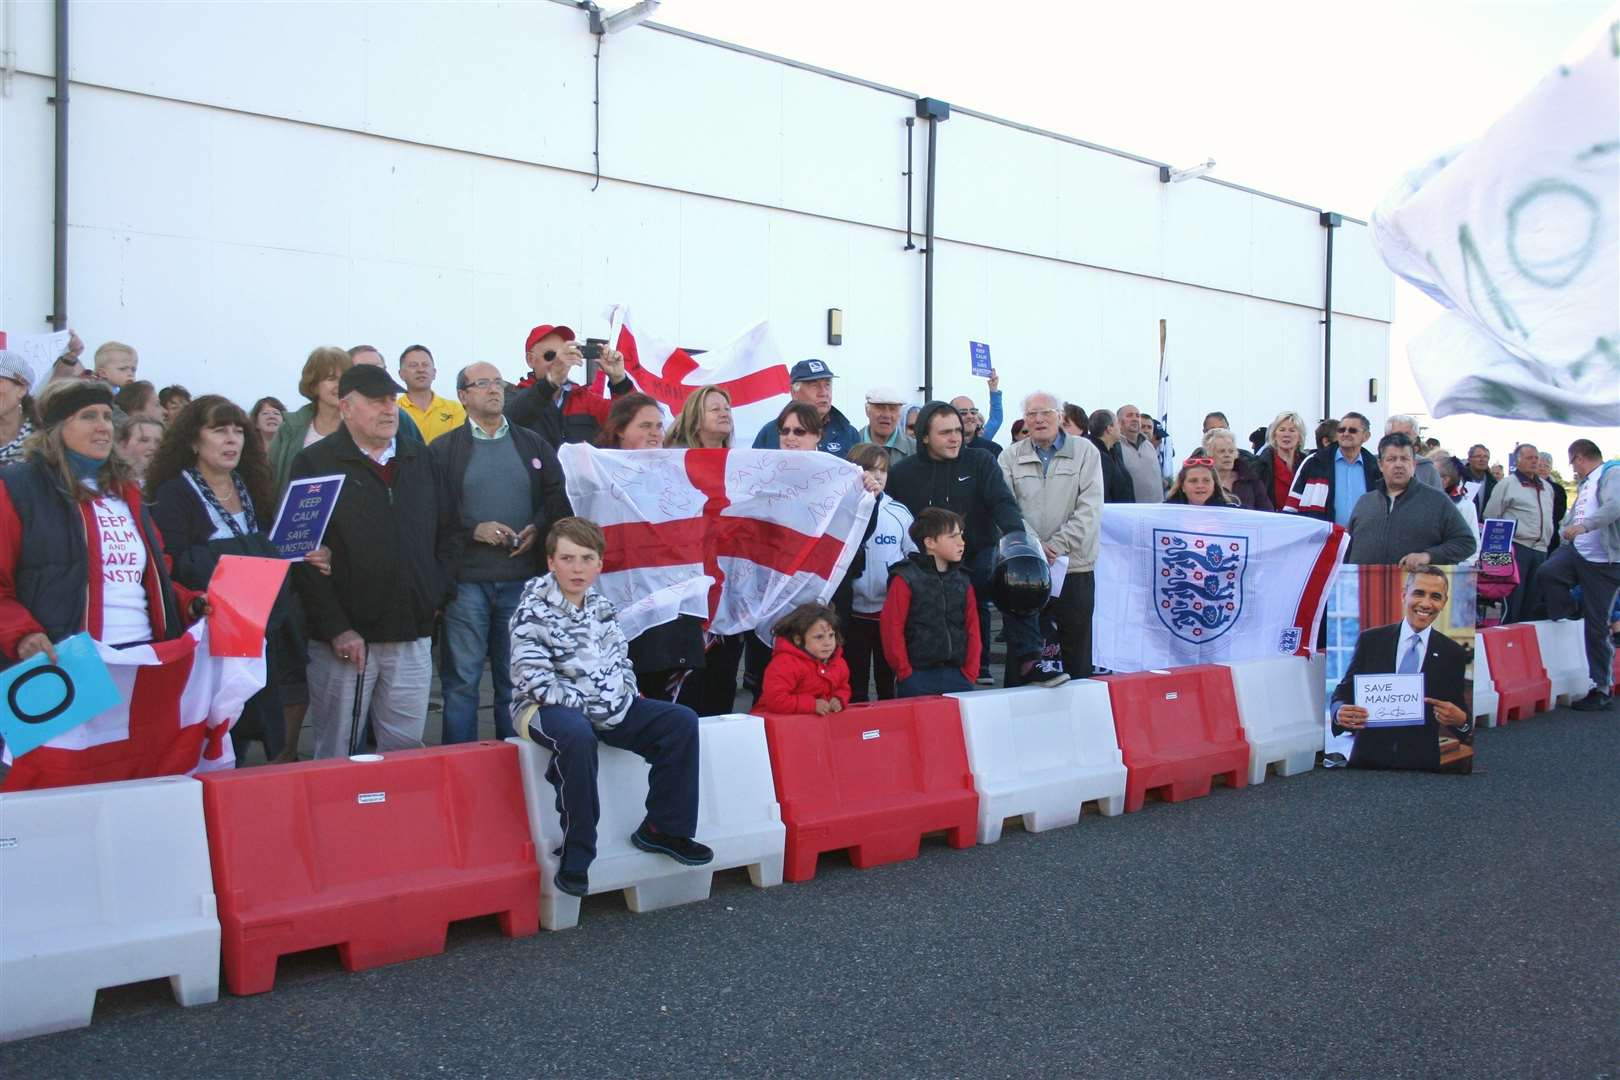 Hundreds of protestors gathered at Manston Airport before it was closed in 2014